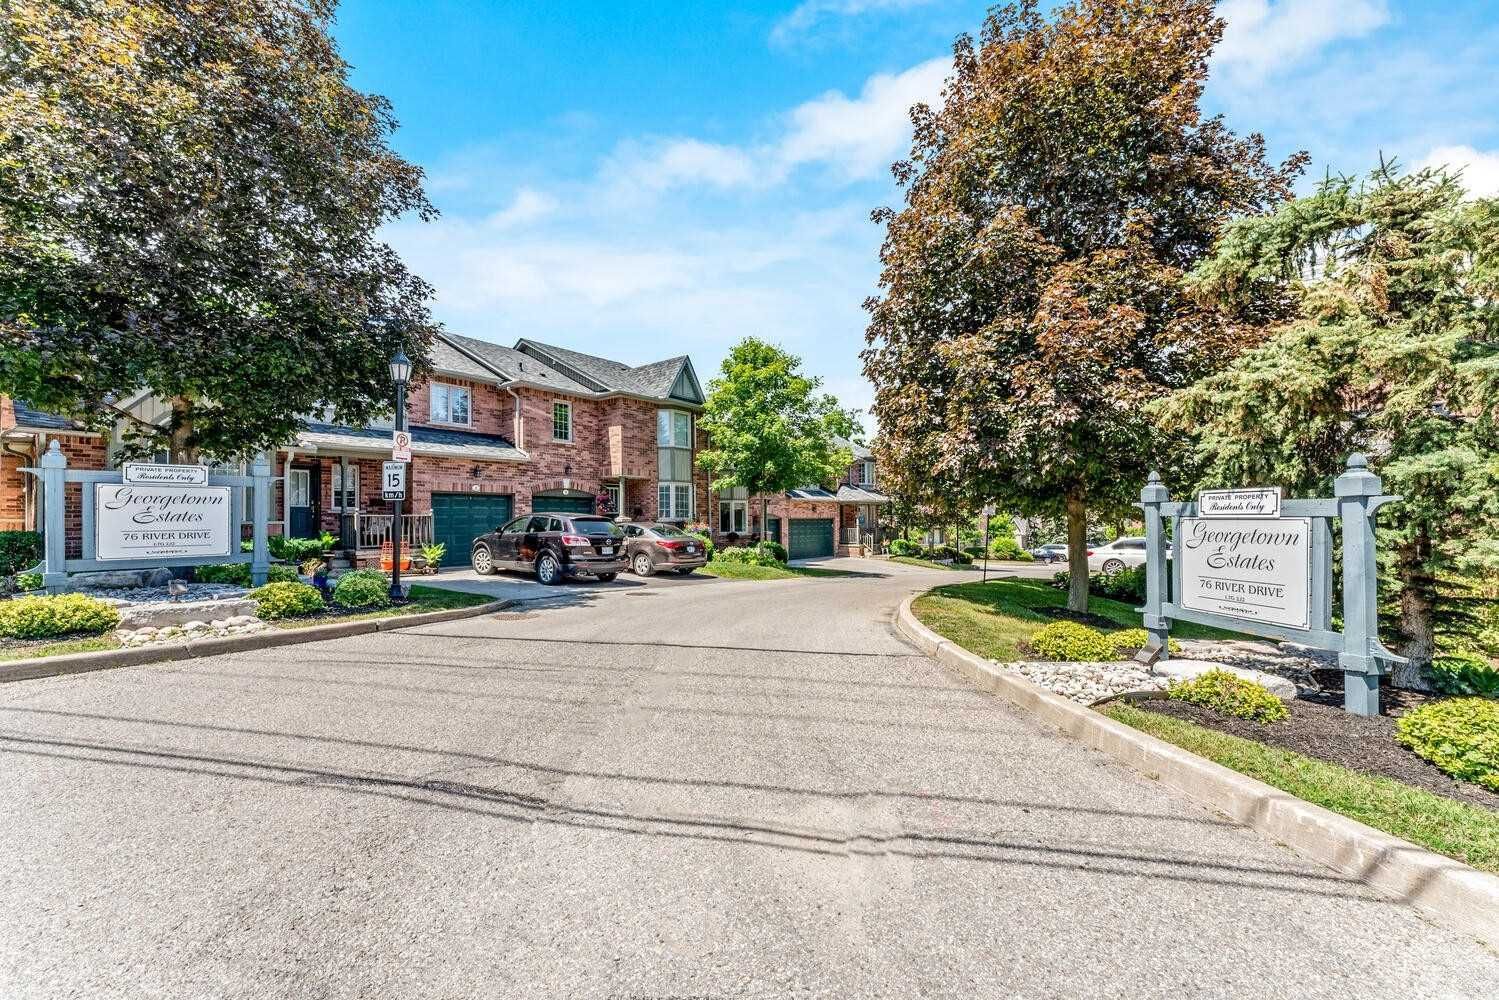 76 River Drive. Georgetown Estates Townhomes is located in  Halton Hills, Toronto - image #1 of 2